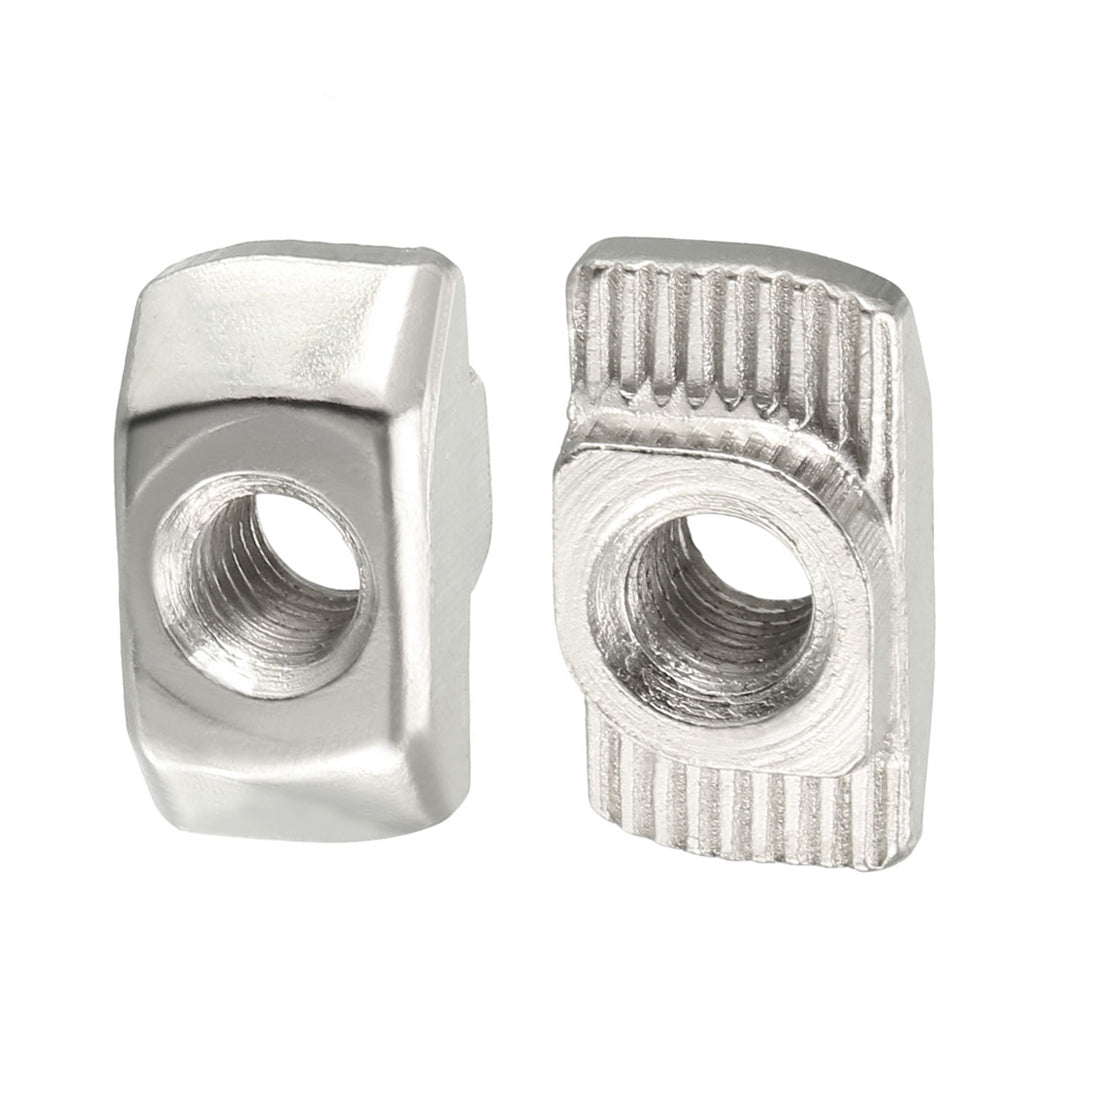 Uxcell Uxcell Sliding T Slot Nuts, M5 Thread for 4545 Series Aluminum Extrusion Profile 20pcs